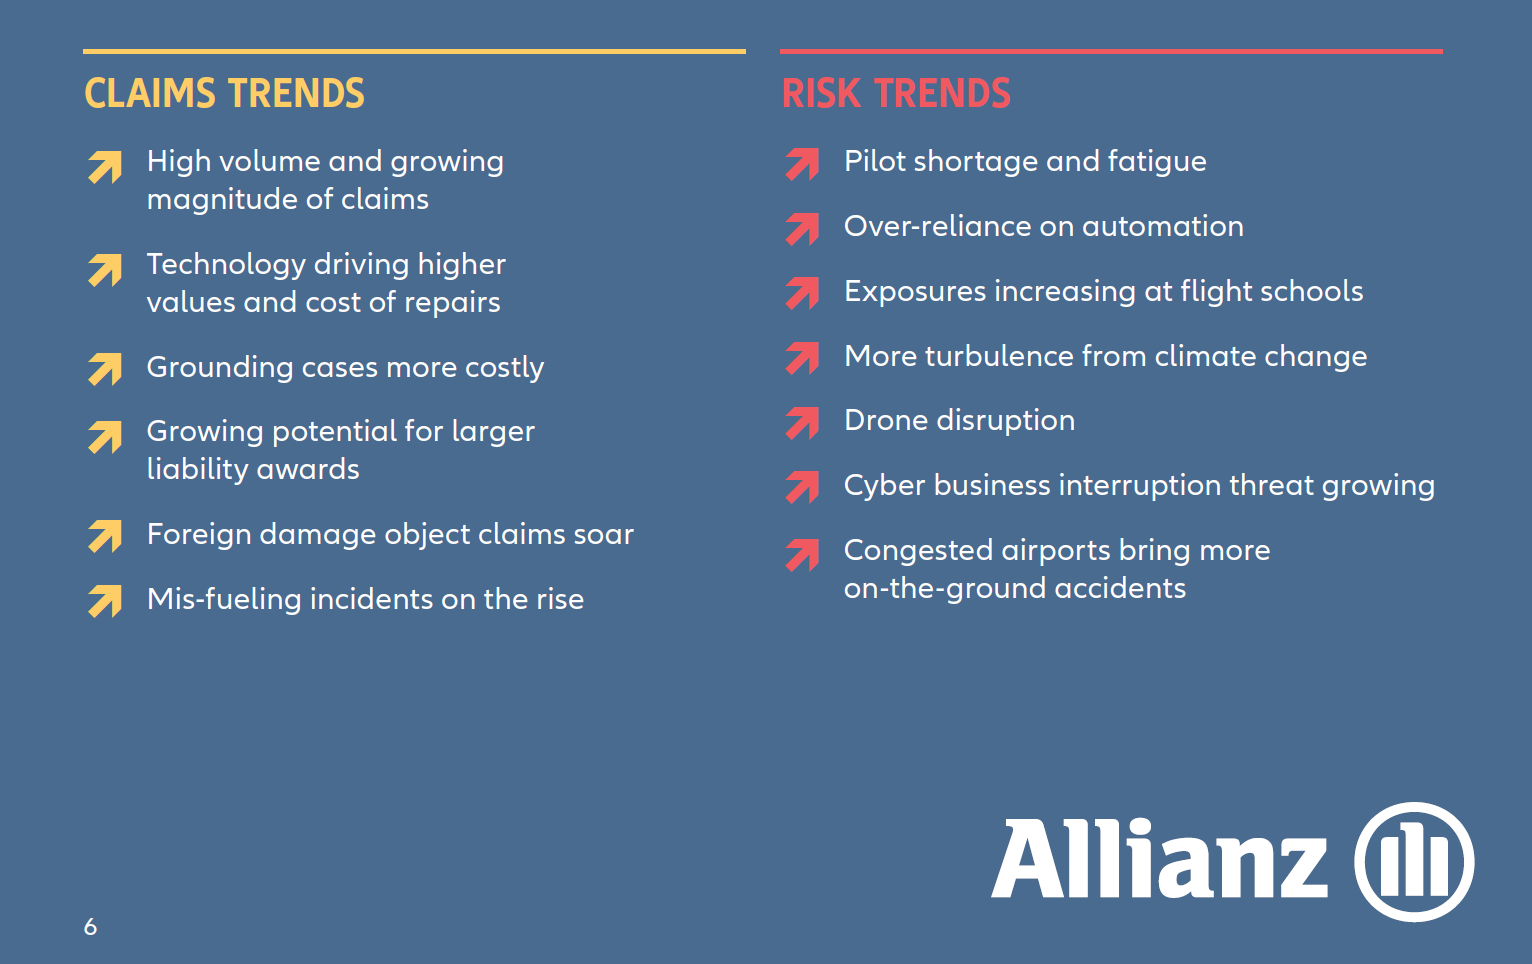 allianz aviation risk claims trends 2020